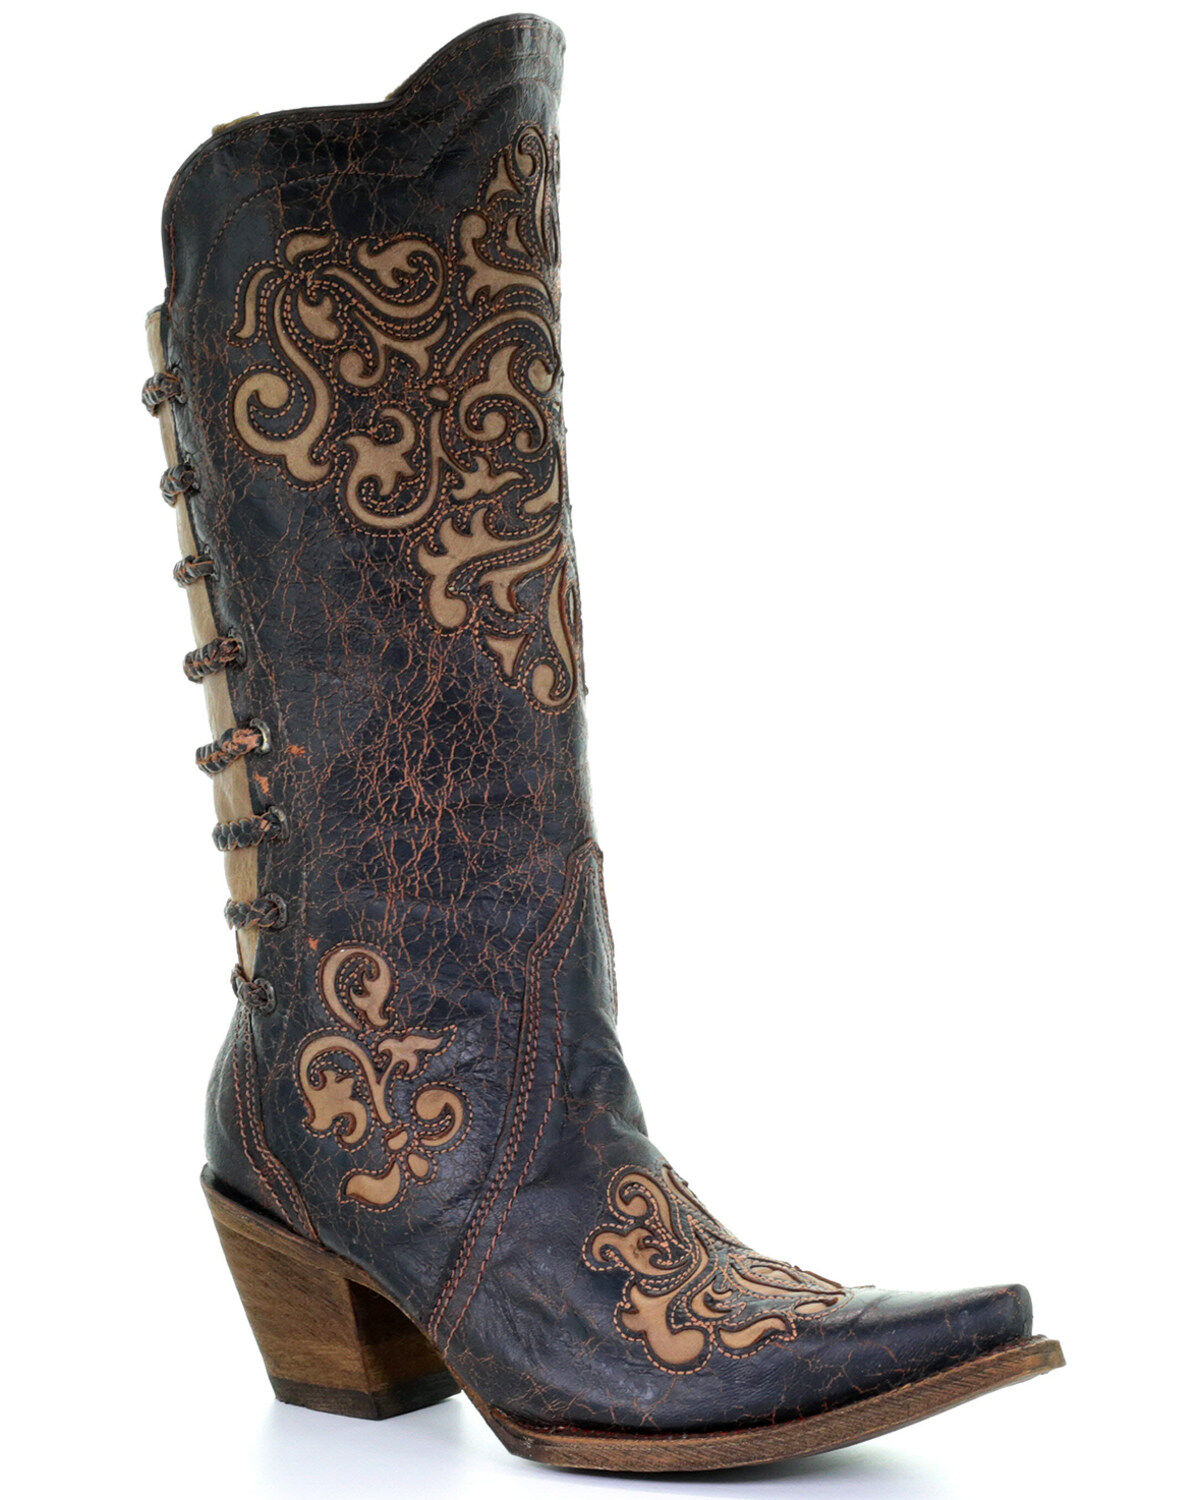 corral tooled leather boots